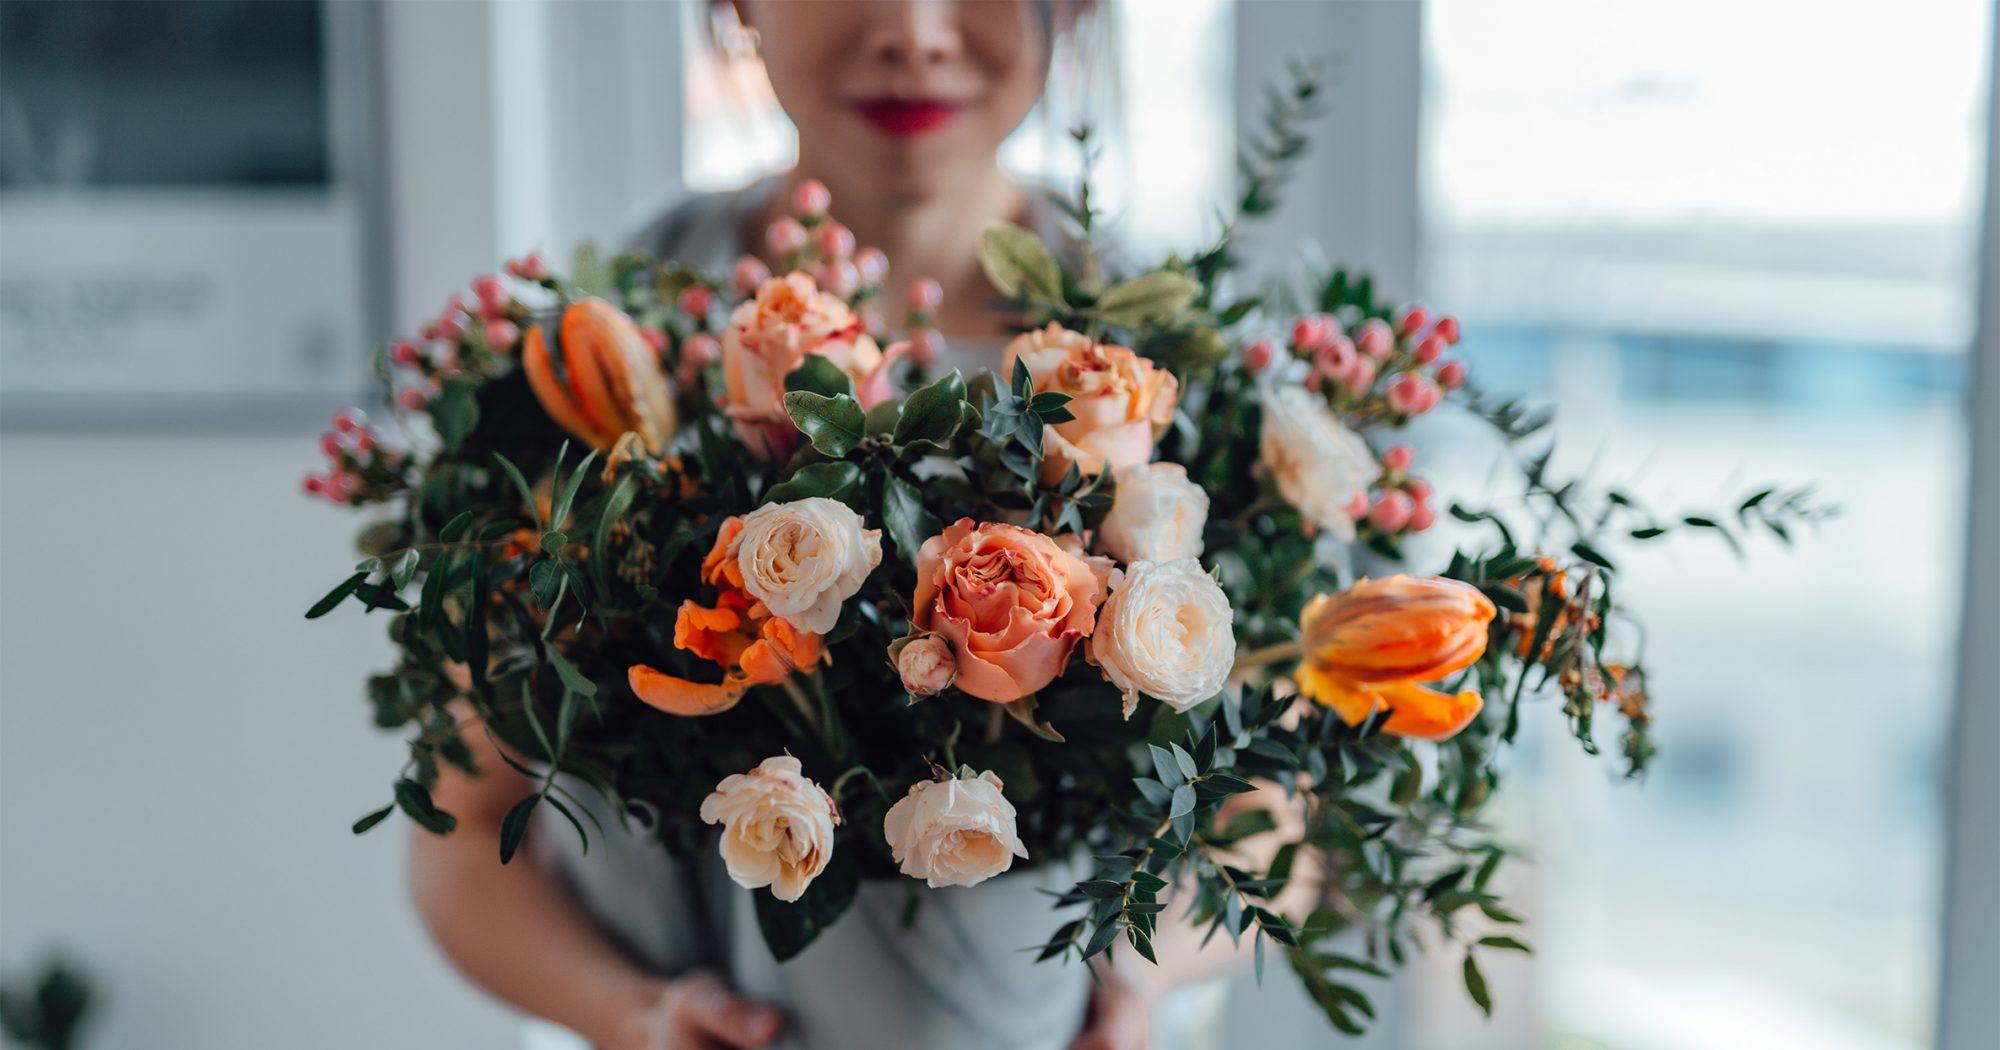 Florists that deliver the best fresh flowers to your doorstep